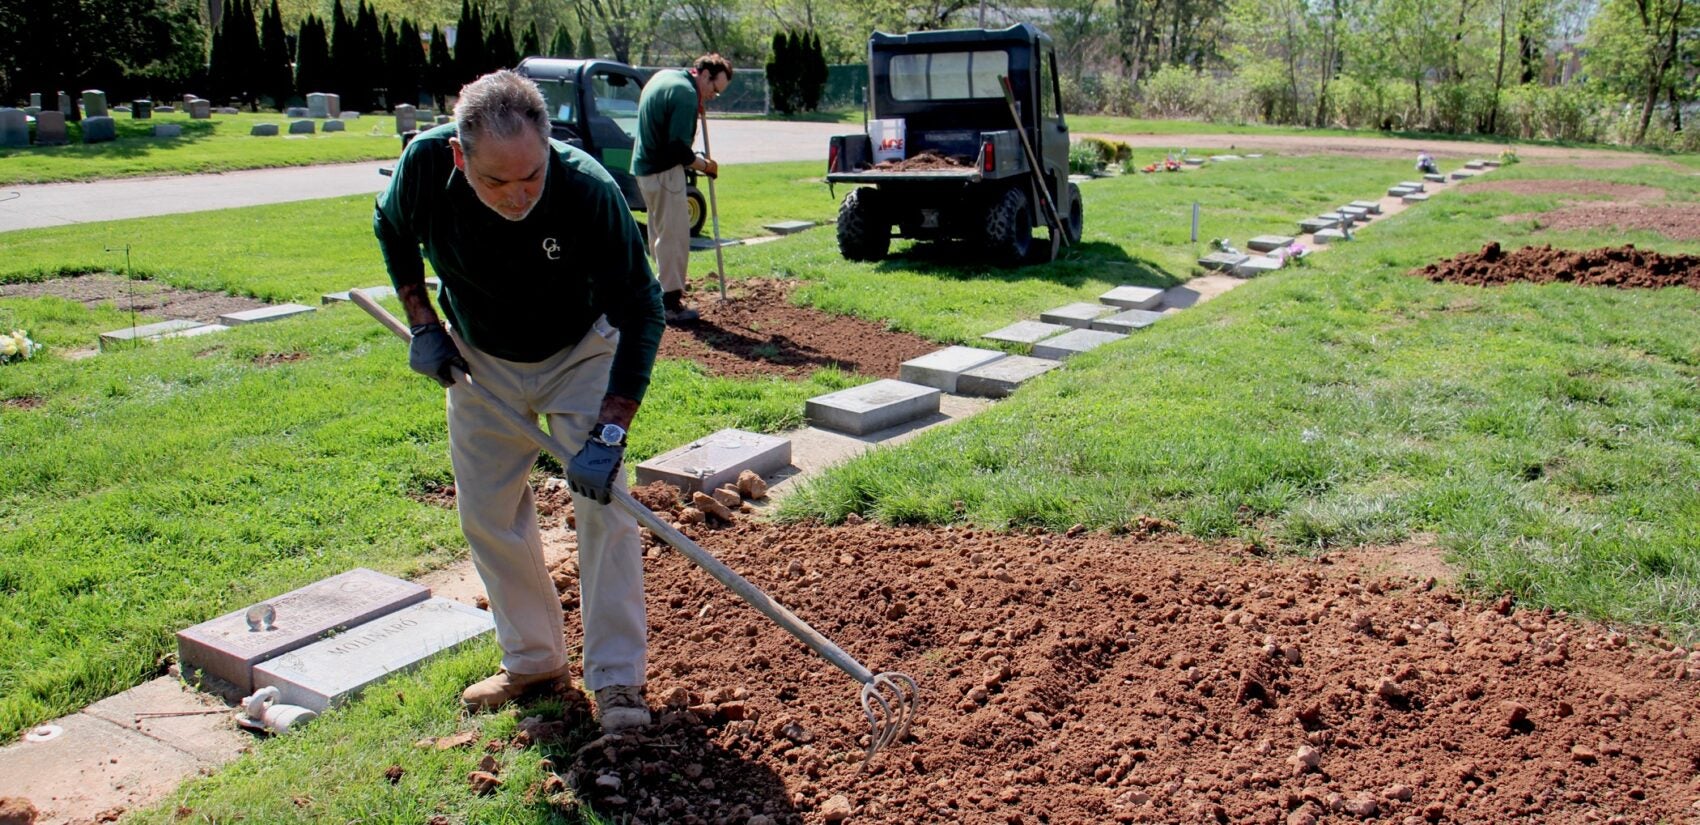 Cemetery workers Pete Sparaco (left) and Frank Mangua tend to fresh graves at Glendale Cemetery in Bloomfield, N.J. 'It's like a war zone,' Sparaco said of the many recent burials. (Emma Lee/WHYY)